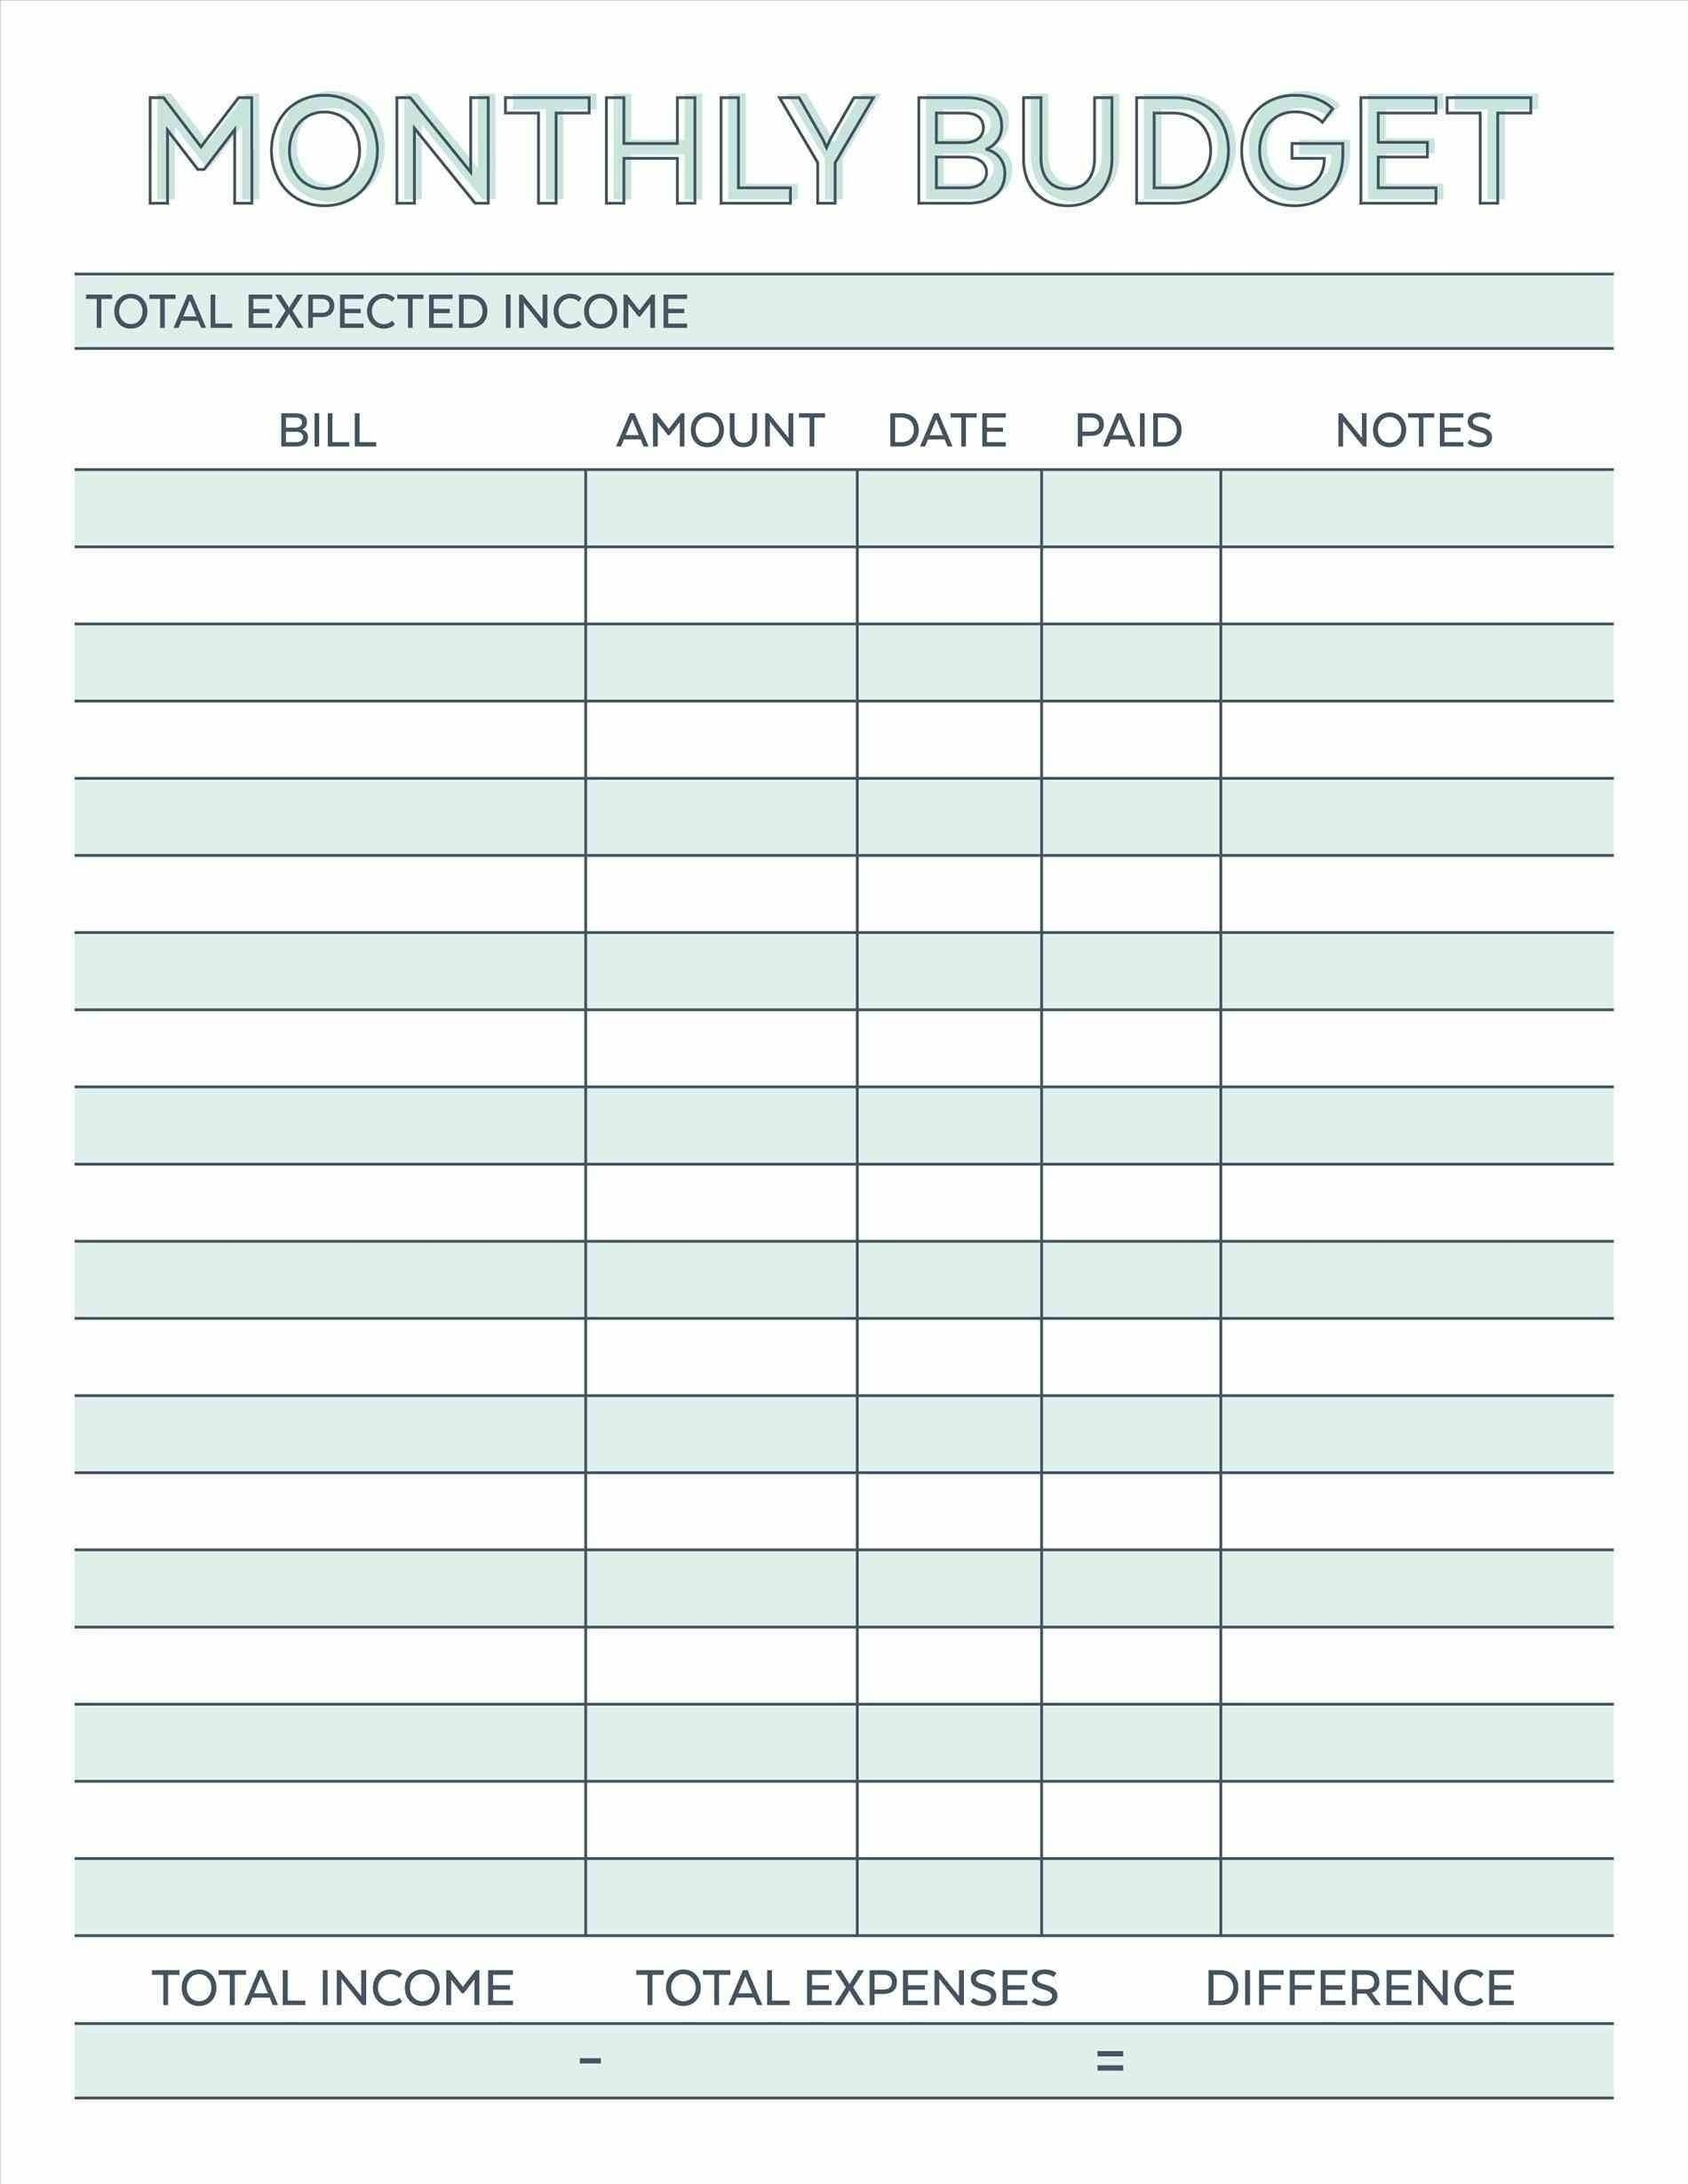 Catch Bill Payment Worksheet Printable